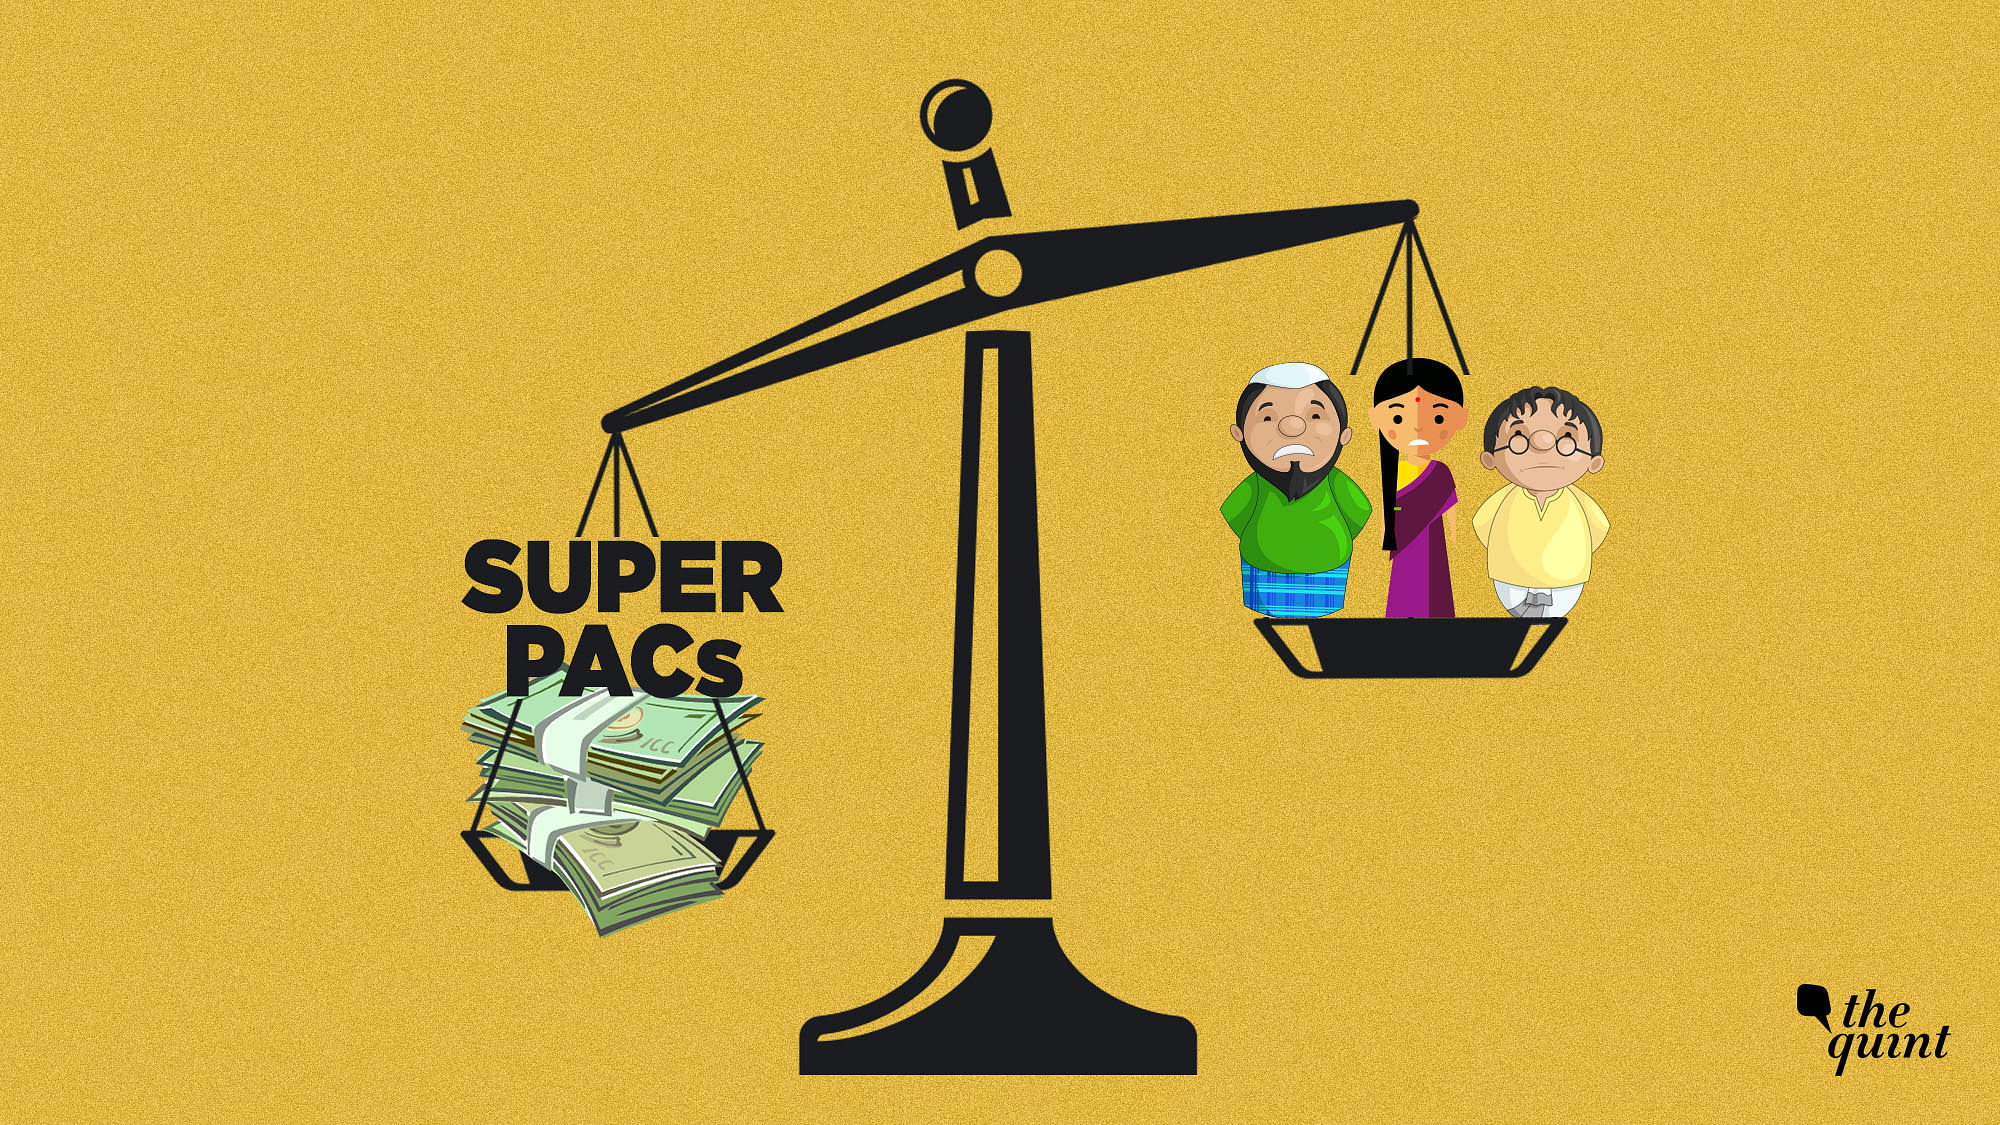 Guess what? Even as America tries to rid itself of super PACs, India has imported the idea.